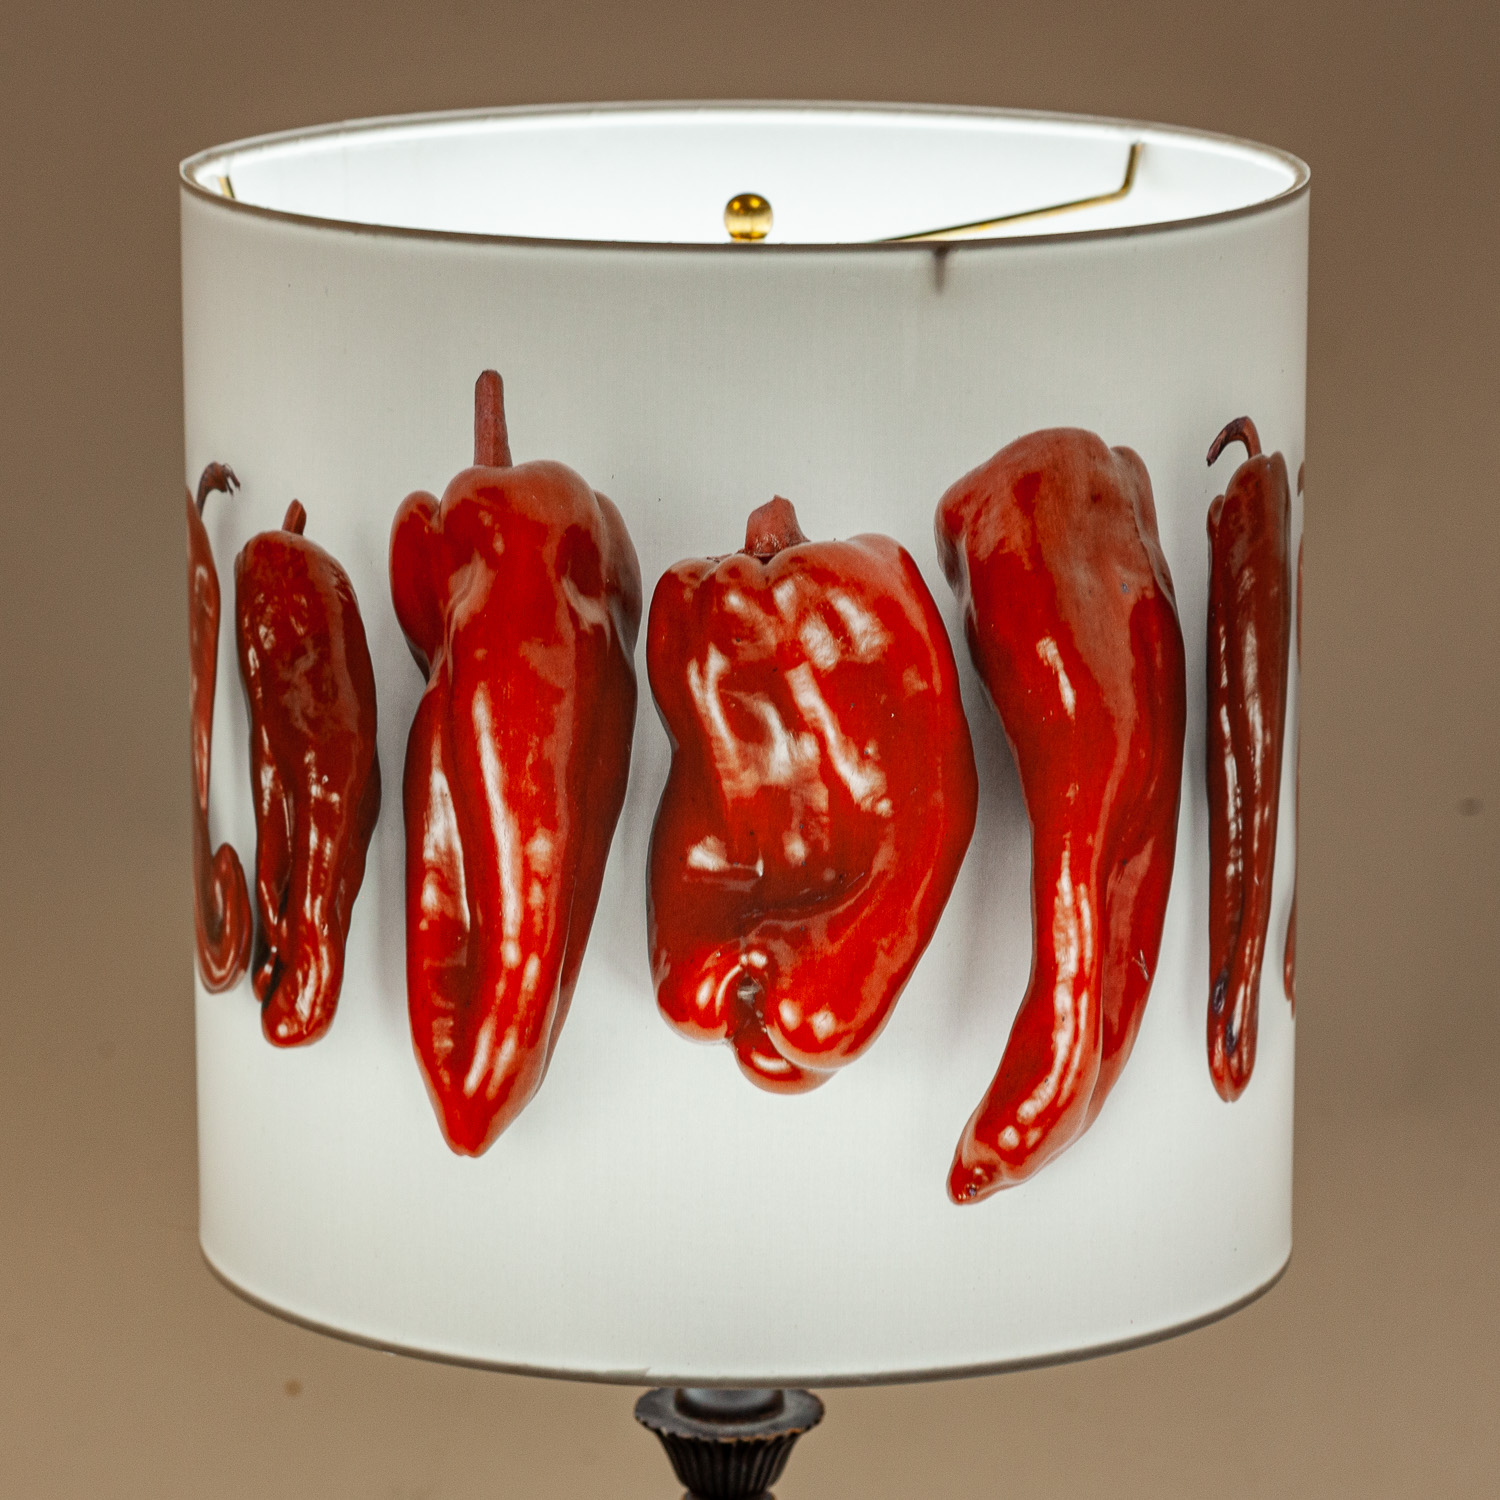 138: Peppers from the garden -- Photo on Lamp shade by David Elmore